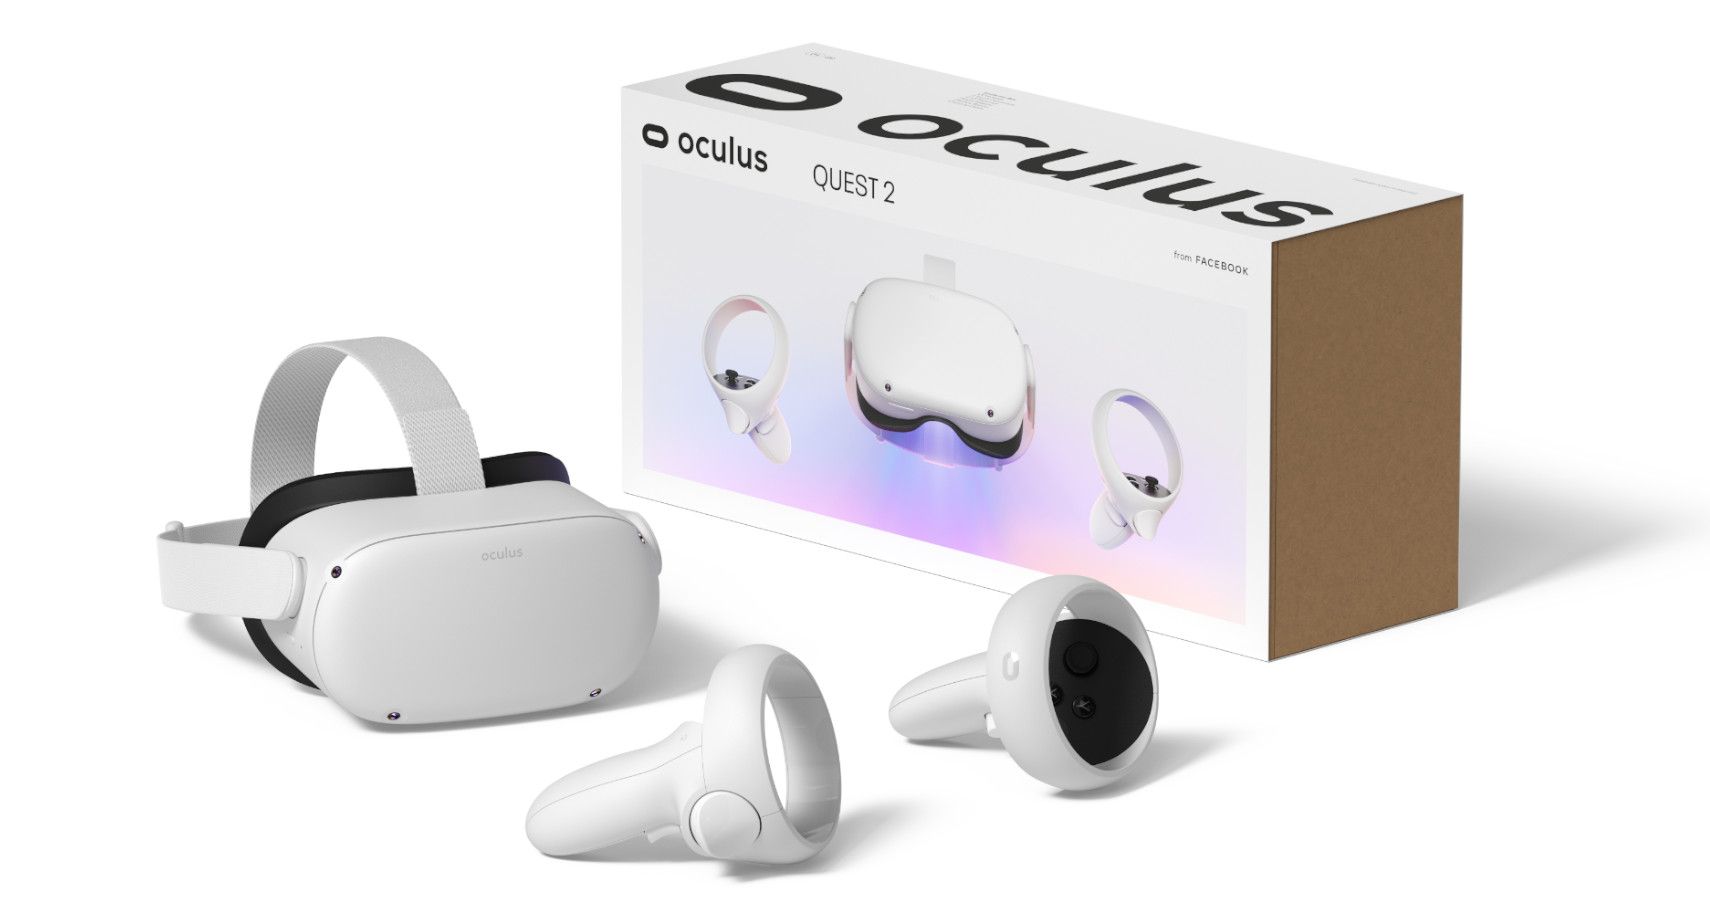 A screenshot of the Oculus box and the hardware that it includes.